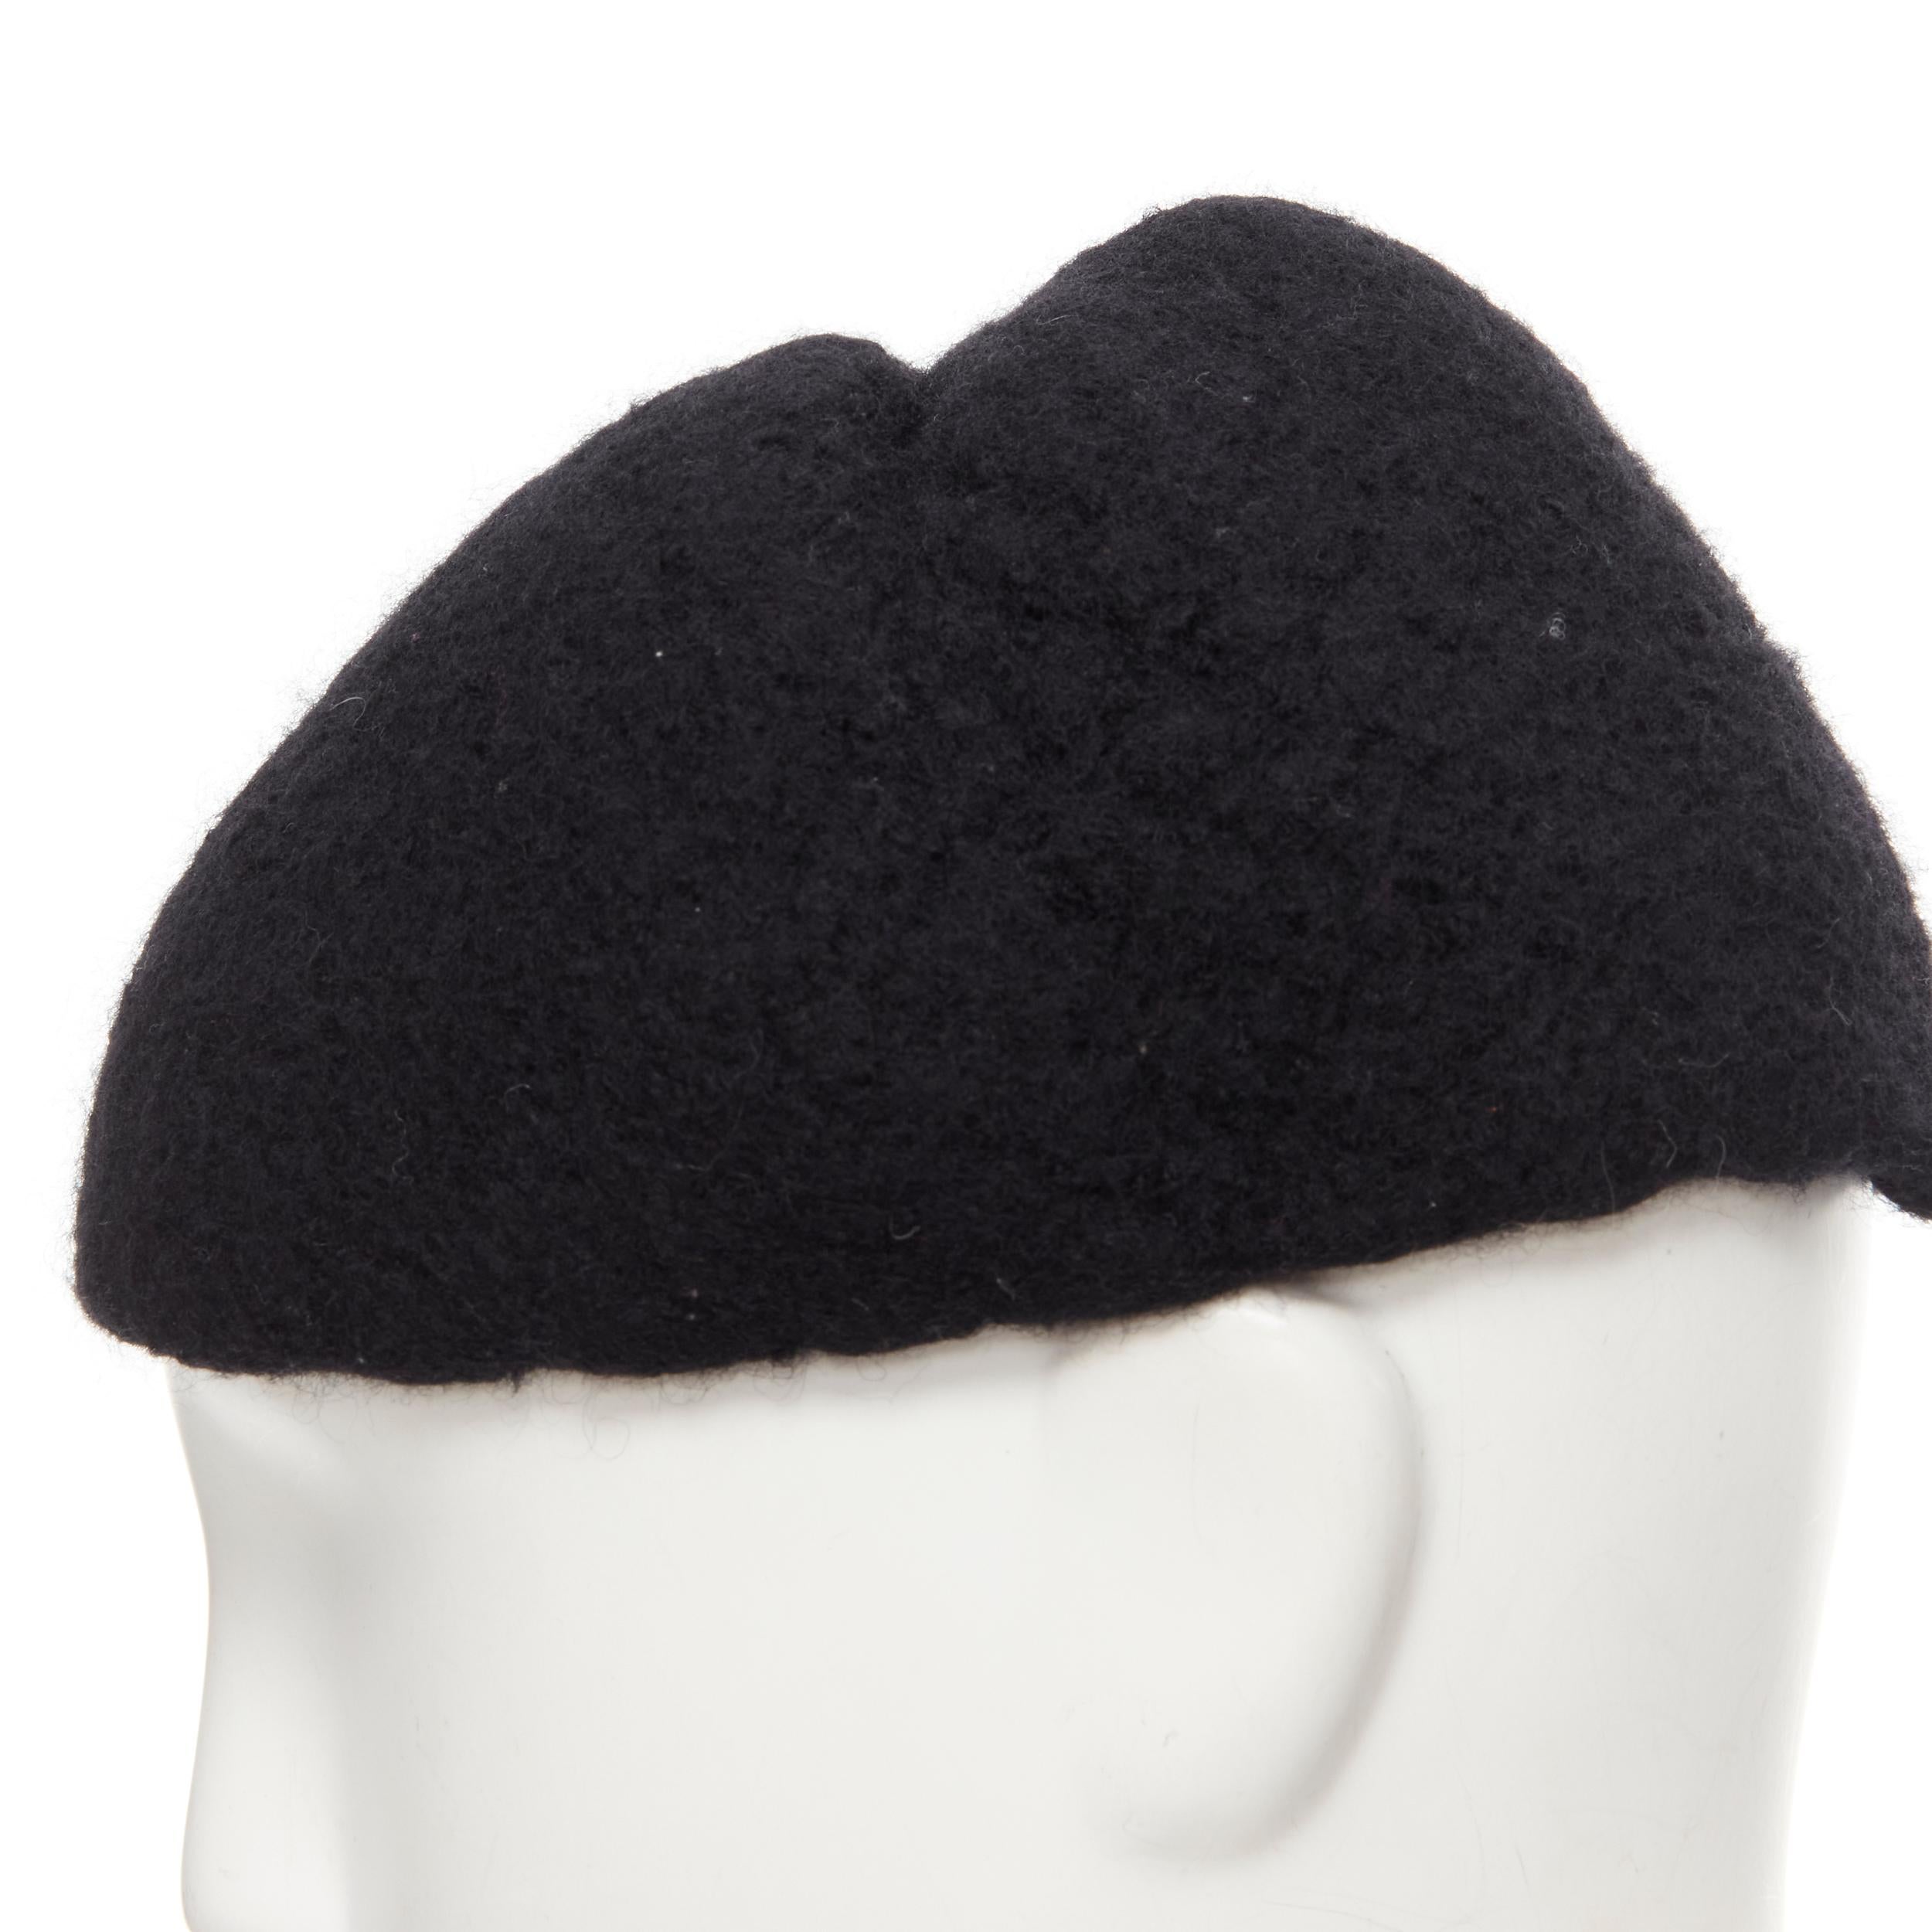 YOHJI YAMAMOTO 1990's Vintage black heavy boiled wool pinched top beanie cap 
Reference: CRTI/A00656 
Brand: Yohji Yamamoto 
Material: Wool 
Color: Black 
Pattern: Solid 
Extra Detail: Pinched seam at top to give structured to hat when worn. 
Made